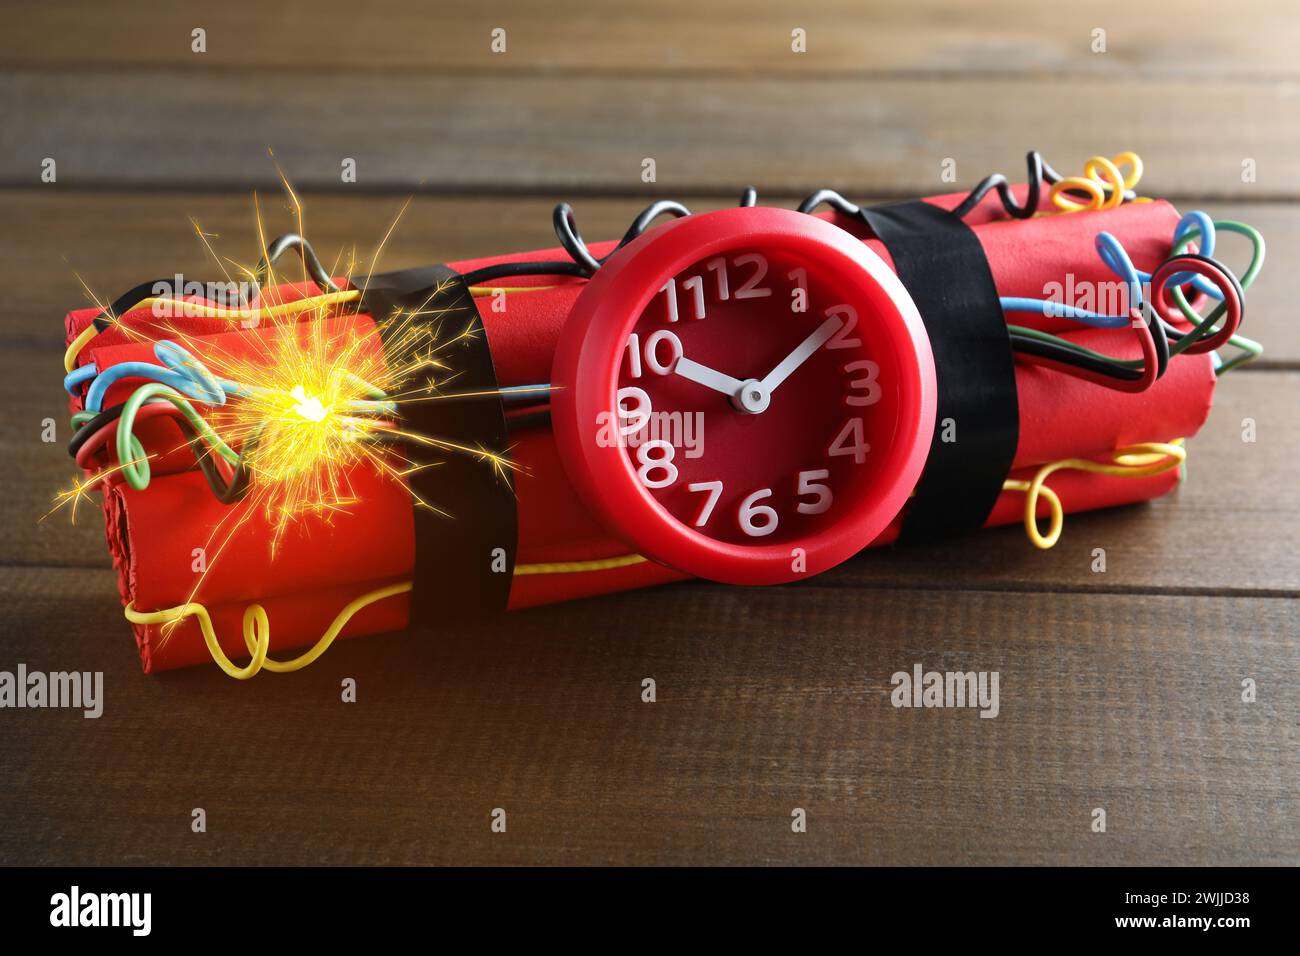 Dynamite time bomb with burning wires on wooden table Stock Photo